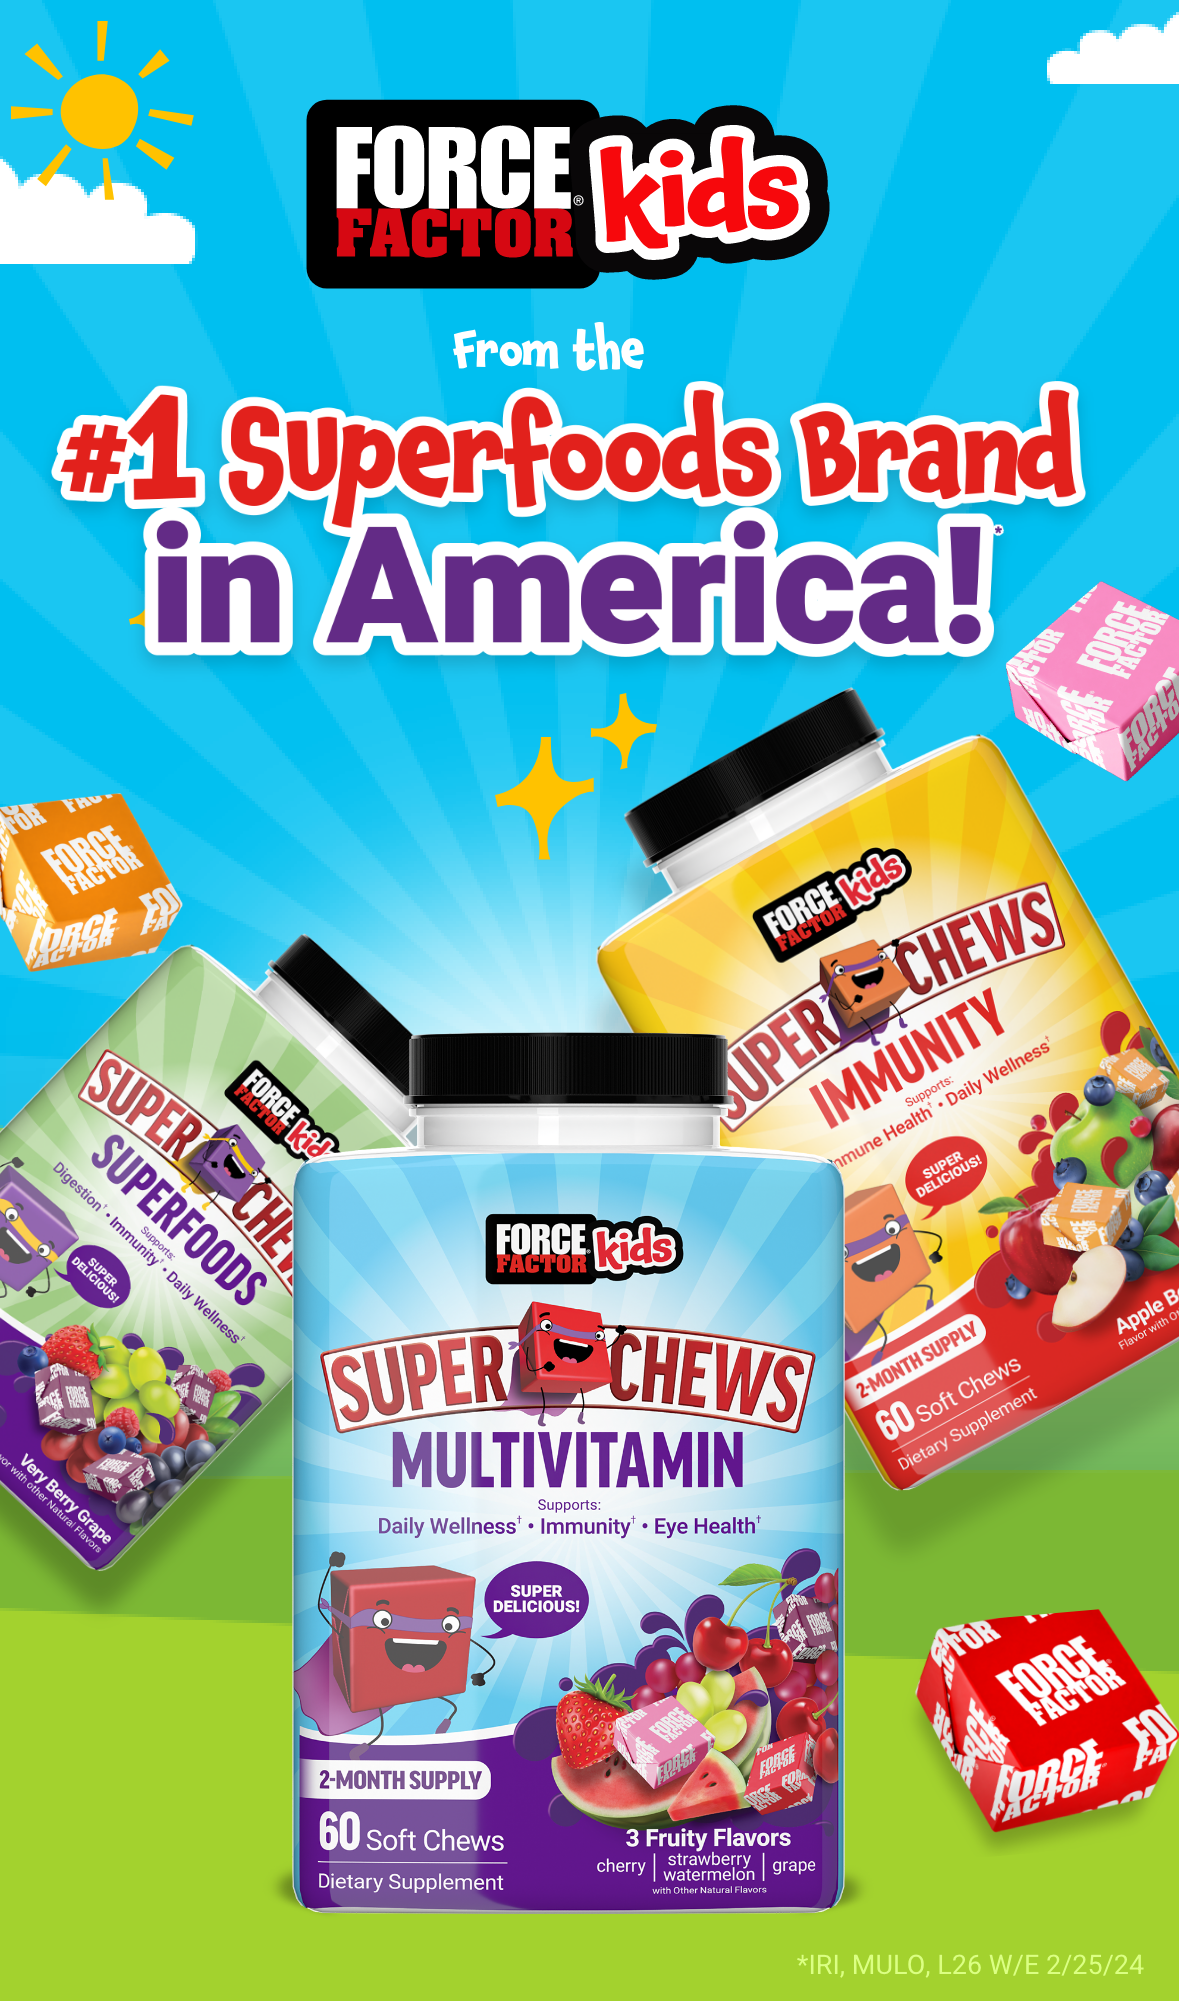 Force Factor Kids logo and #1 Superfoods Brand in America. Force Factor Kids Superfoods, Multivitamin, and Immunity Super Chews.